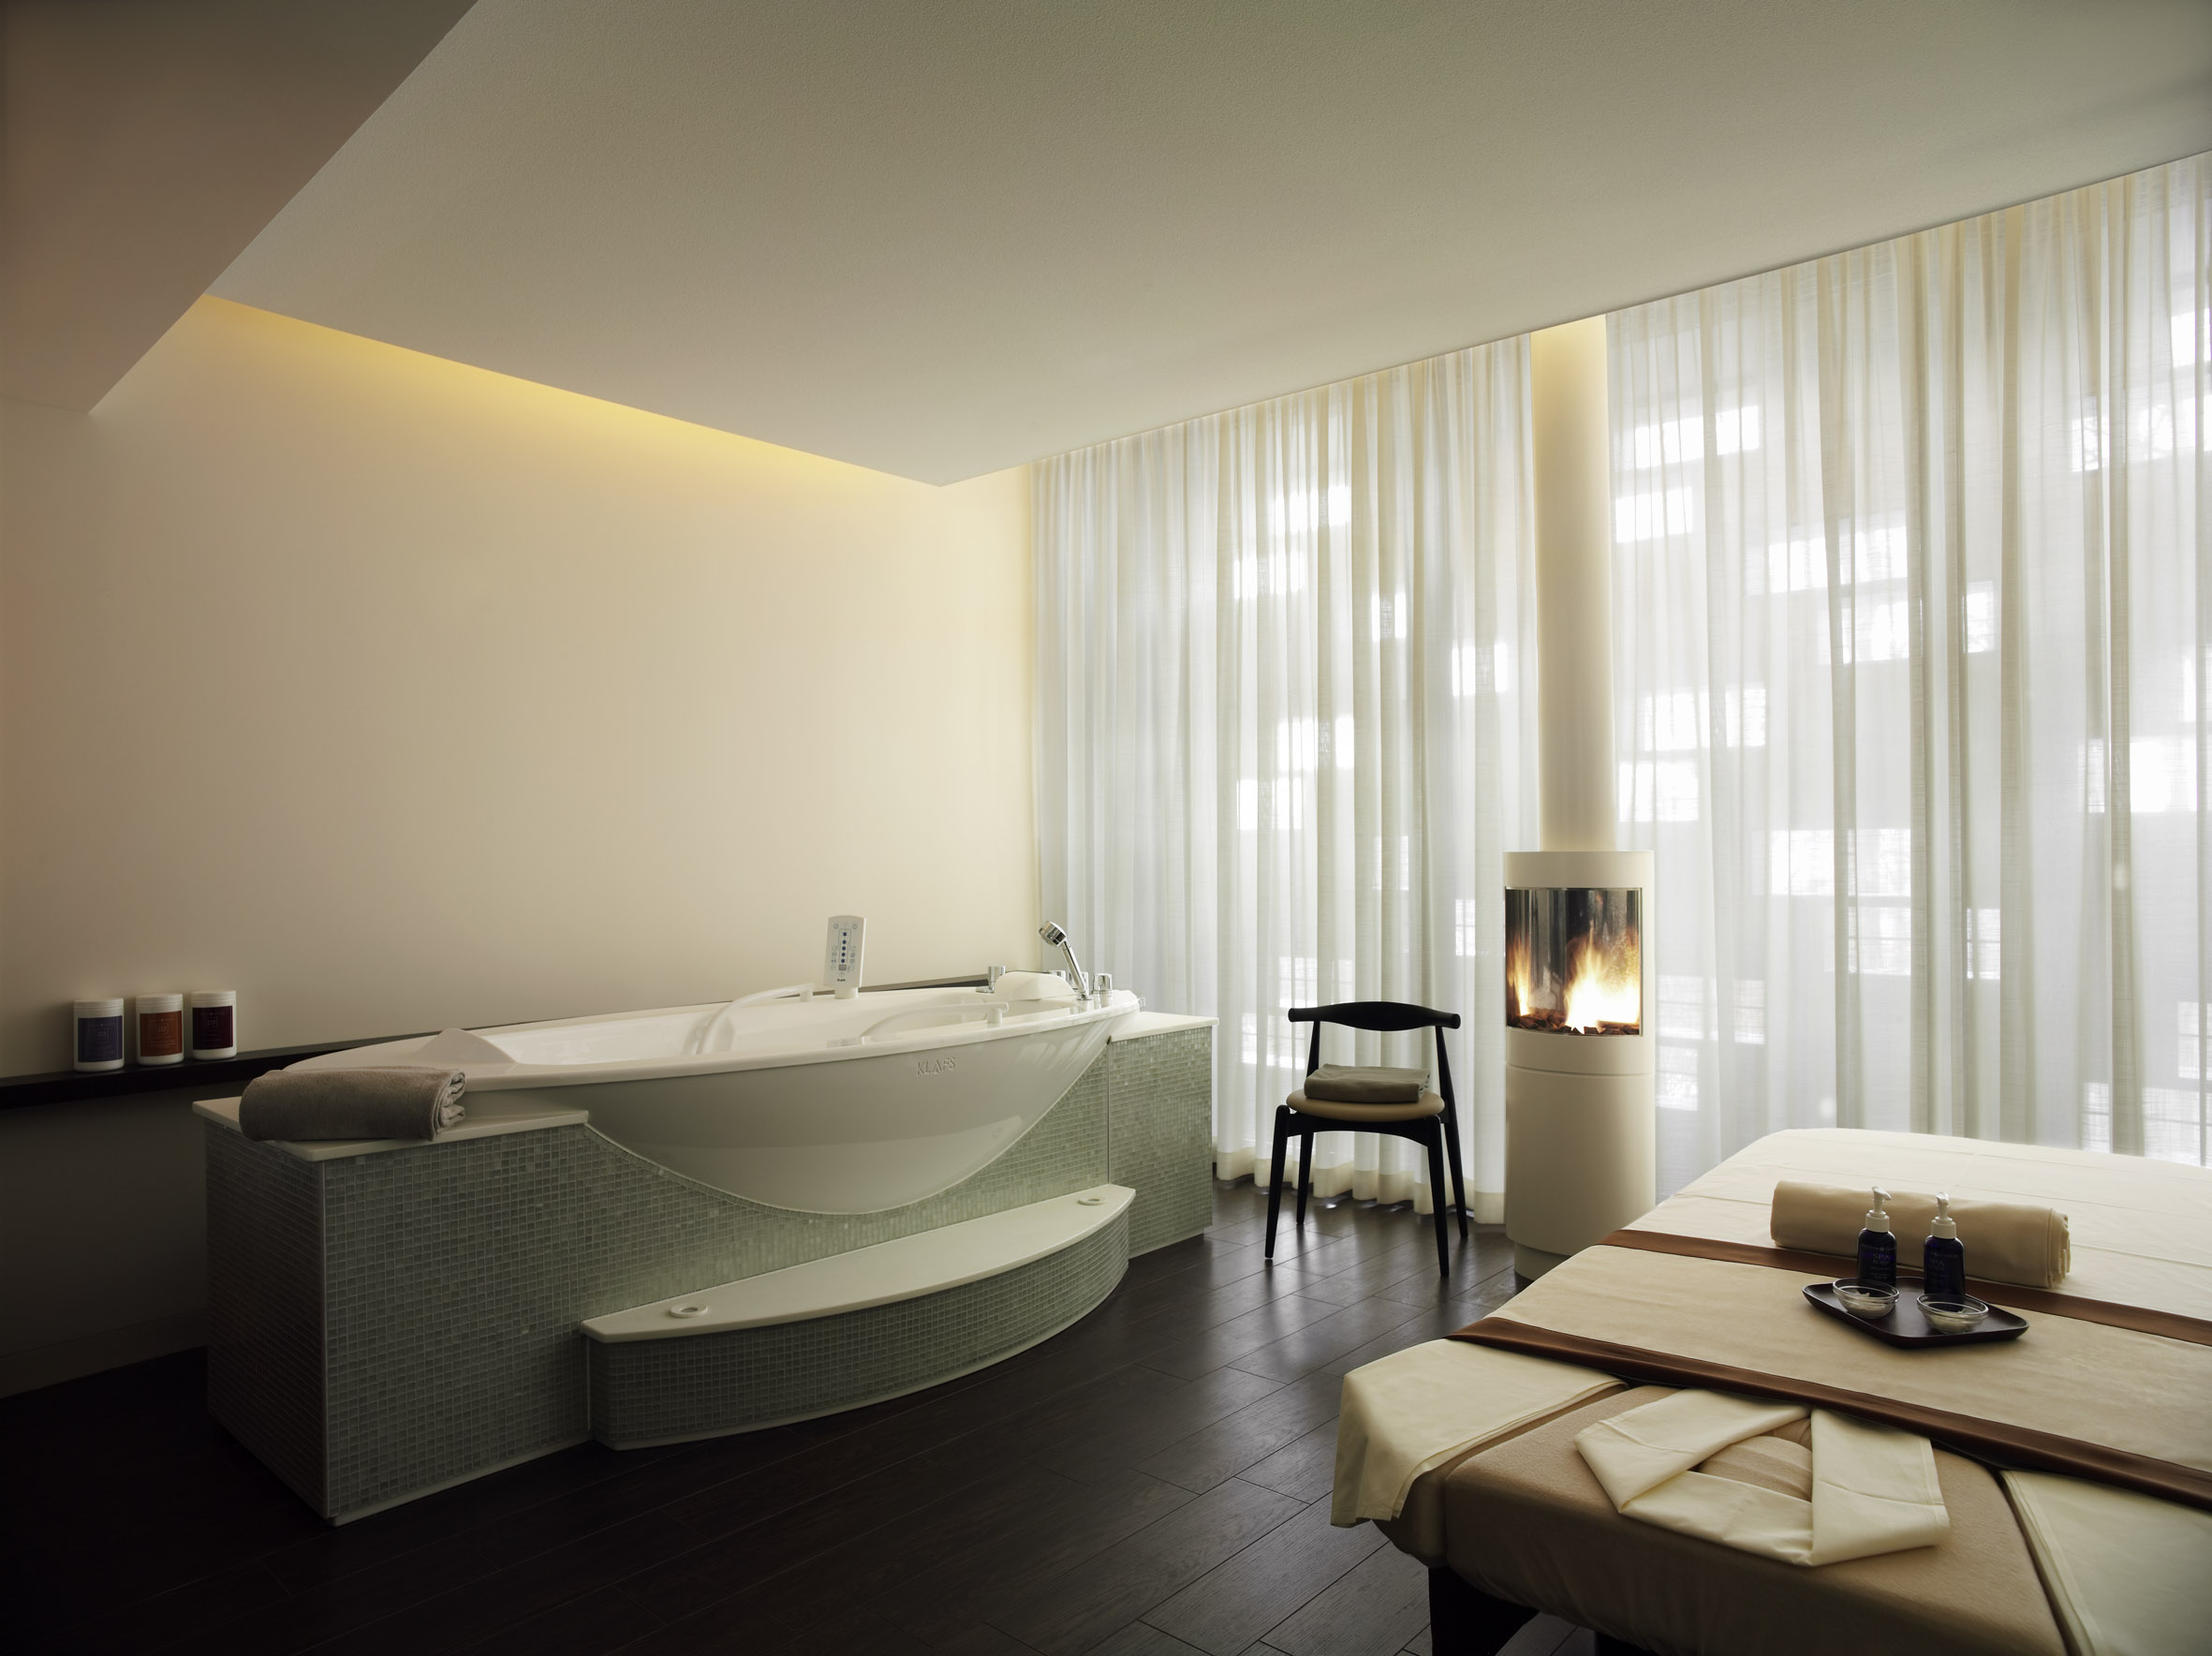 Design_Contract_An_inside_look_The_Dolder_Grand_in_Zurich_Image4